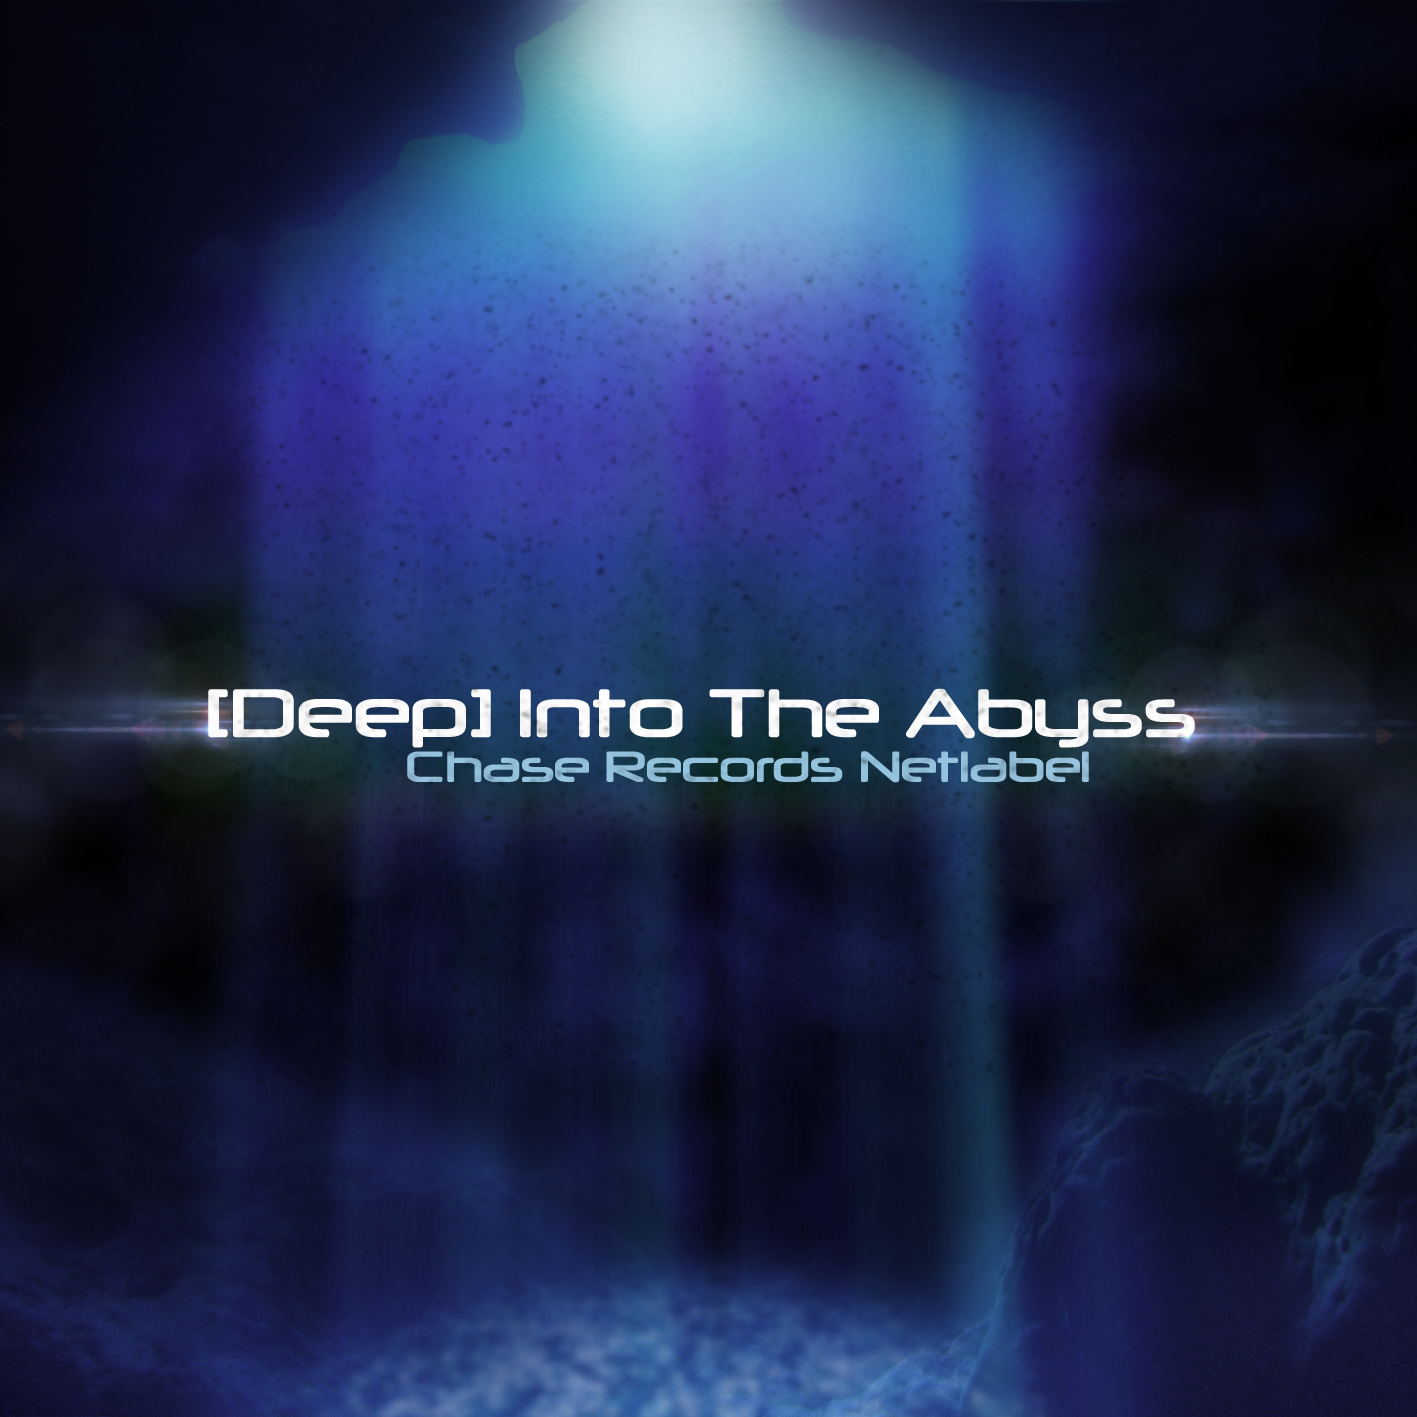 [Deep] Into The Abyss